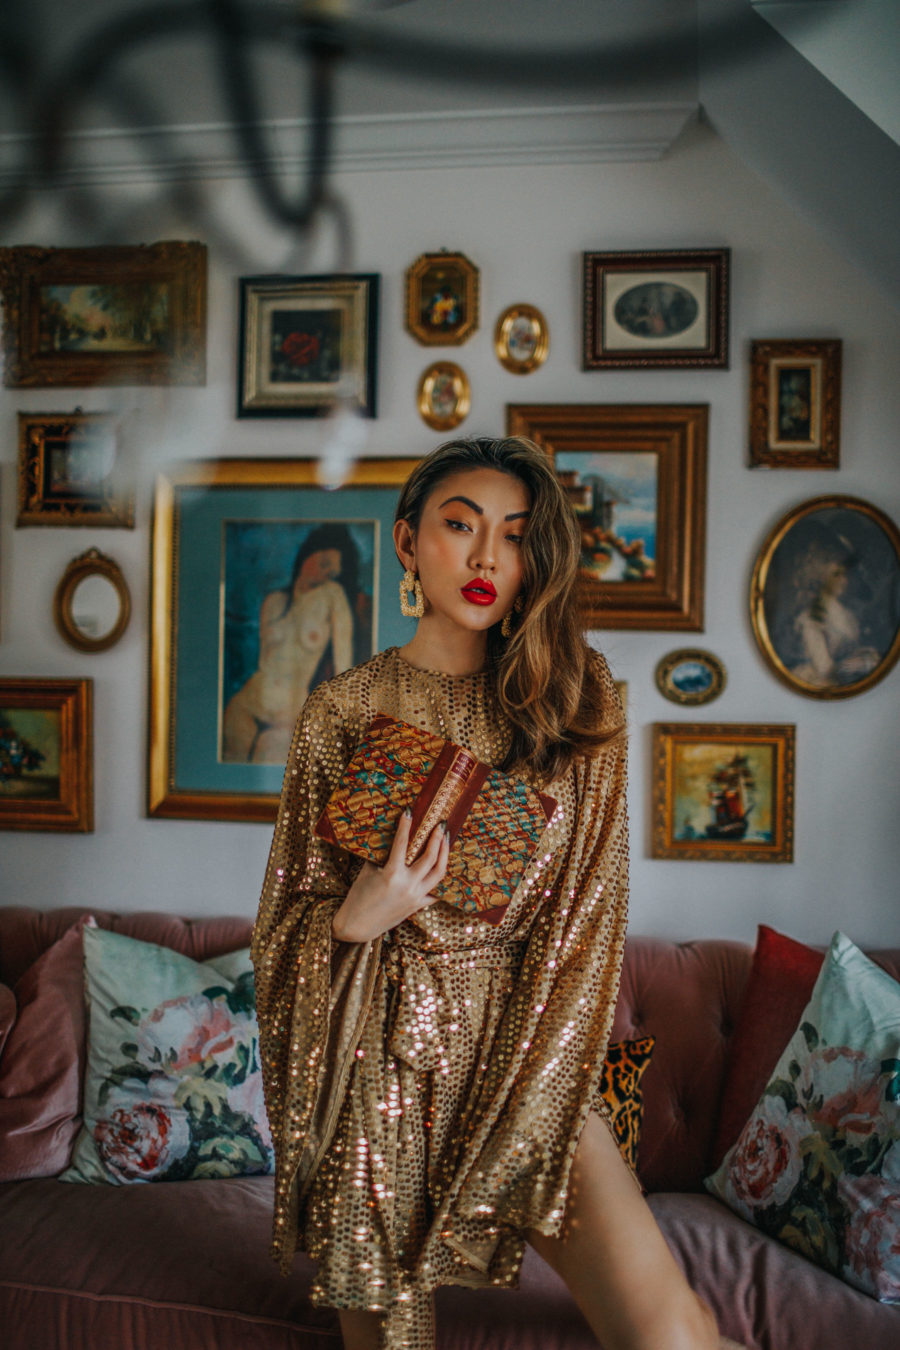 fashion blogger jessica wang wears gold sequin dress with bold red lips // Notjessfashion.com